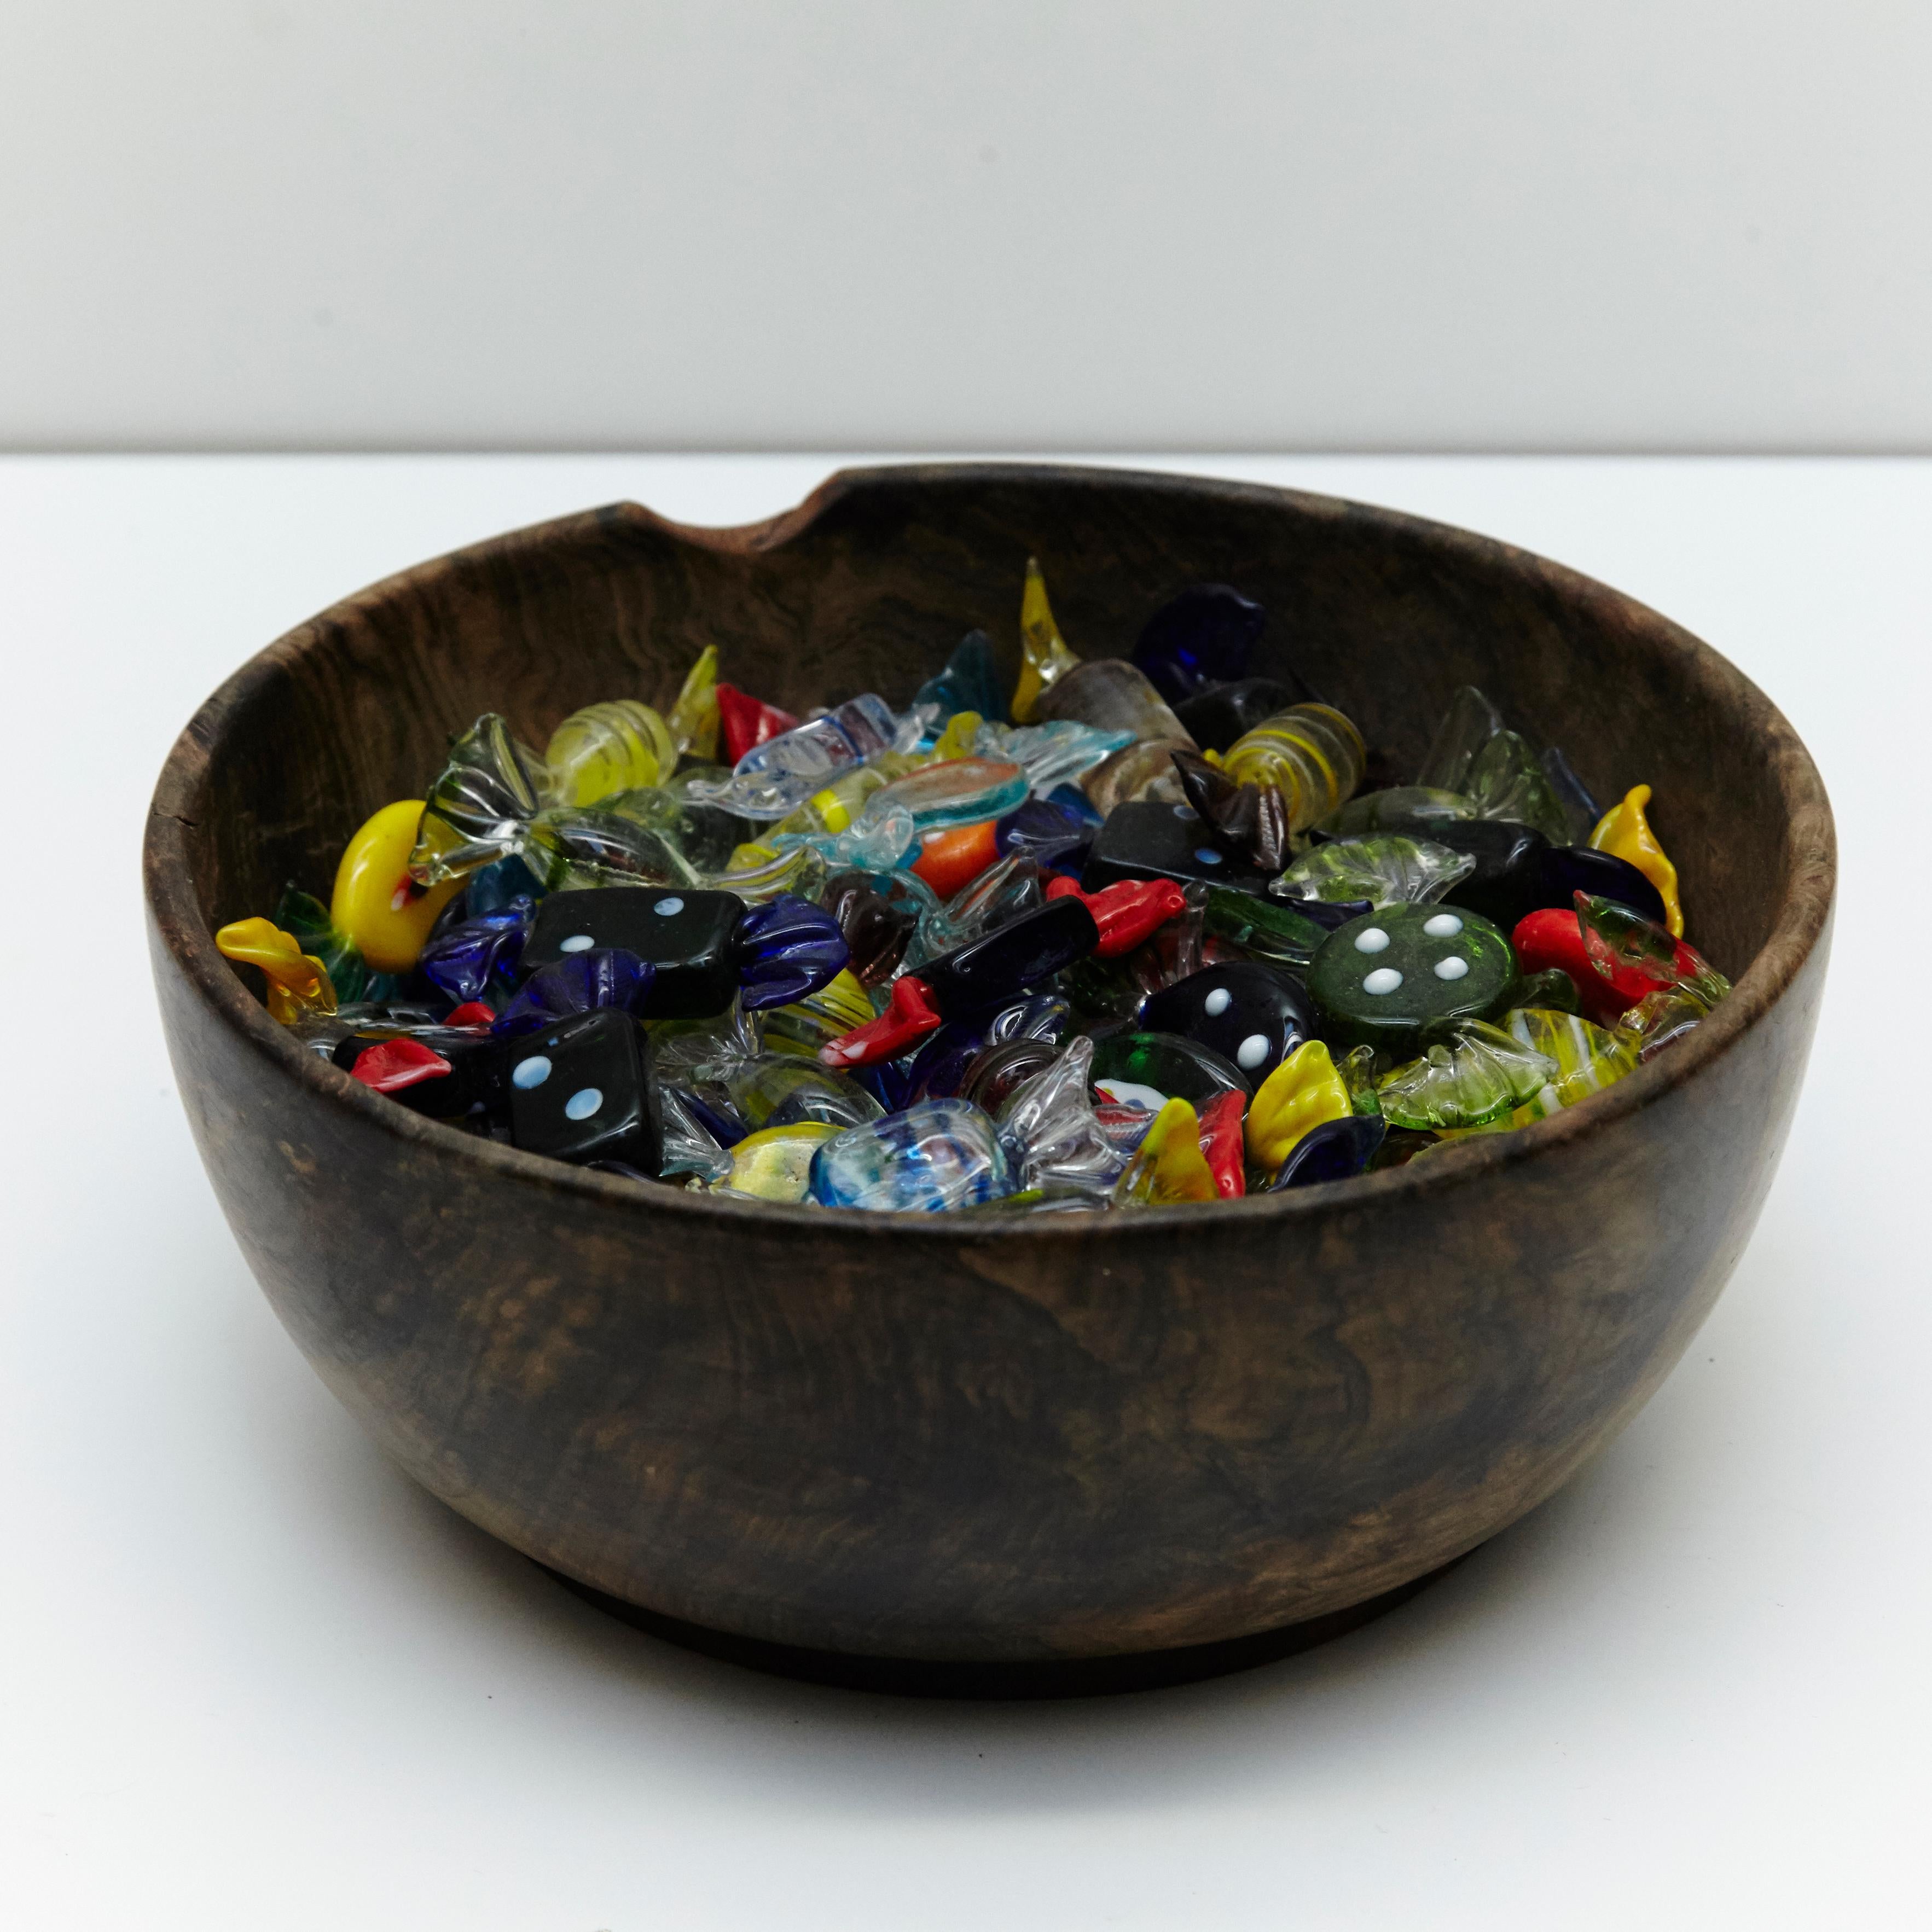 Large set of Murano glass candy small sculptures on olive wood bowl, circa 1970

Manufactured in Italy.

In original condition with minor wear consistent of age and use, preserving a beautiful patina.